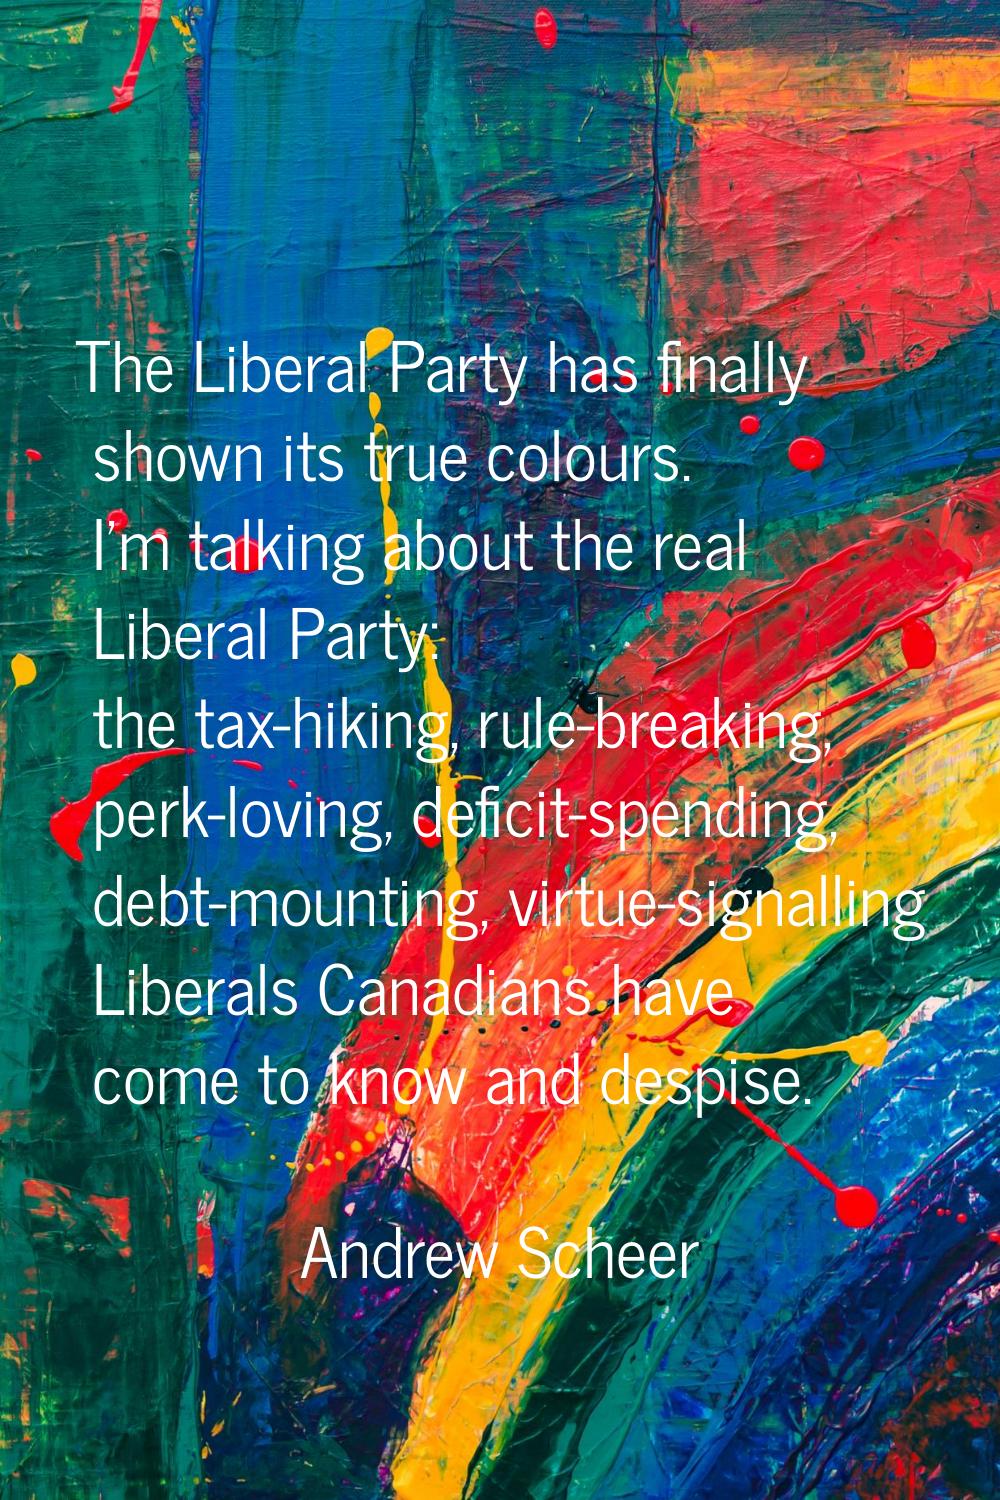 The Liberal Party has finally shown its true colours. I'm talking about the real Liberal Party: the